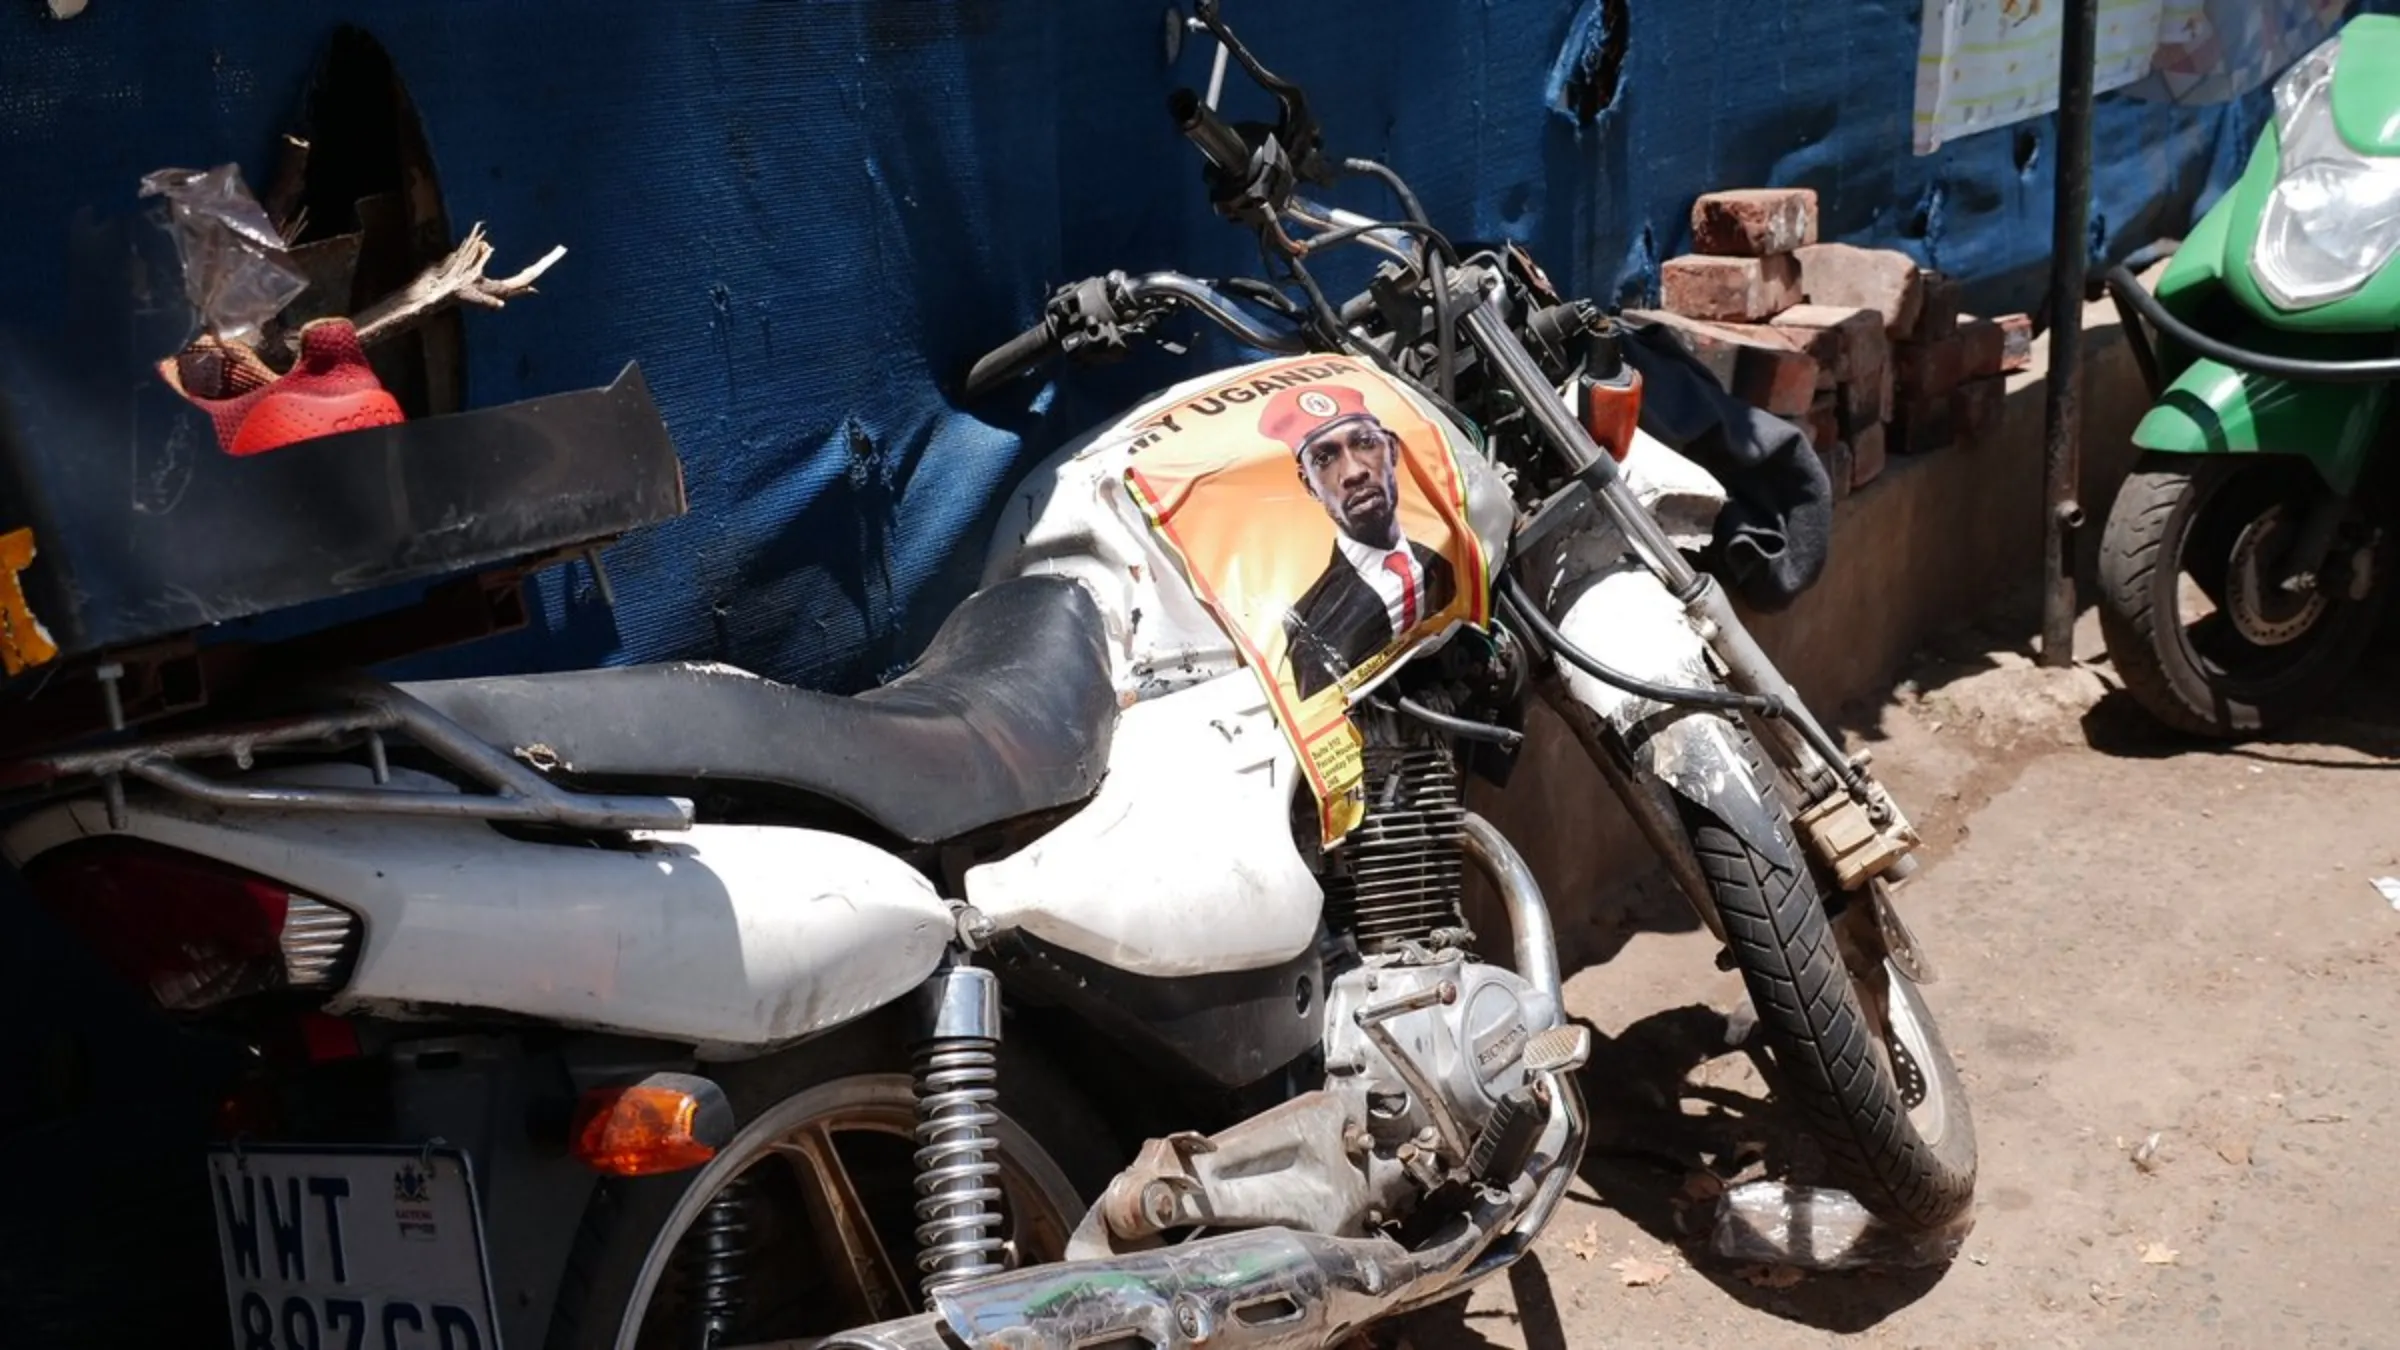 A damaged food delivery motorcycle with a poster of Bobi Wine, a Ugandan singer and politician, leans against a wall in Johannesburg, South Africa. January 22, 2021. Thomson Reuters Foundation/Kim Harrisberg